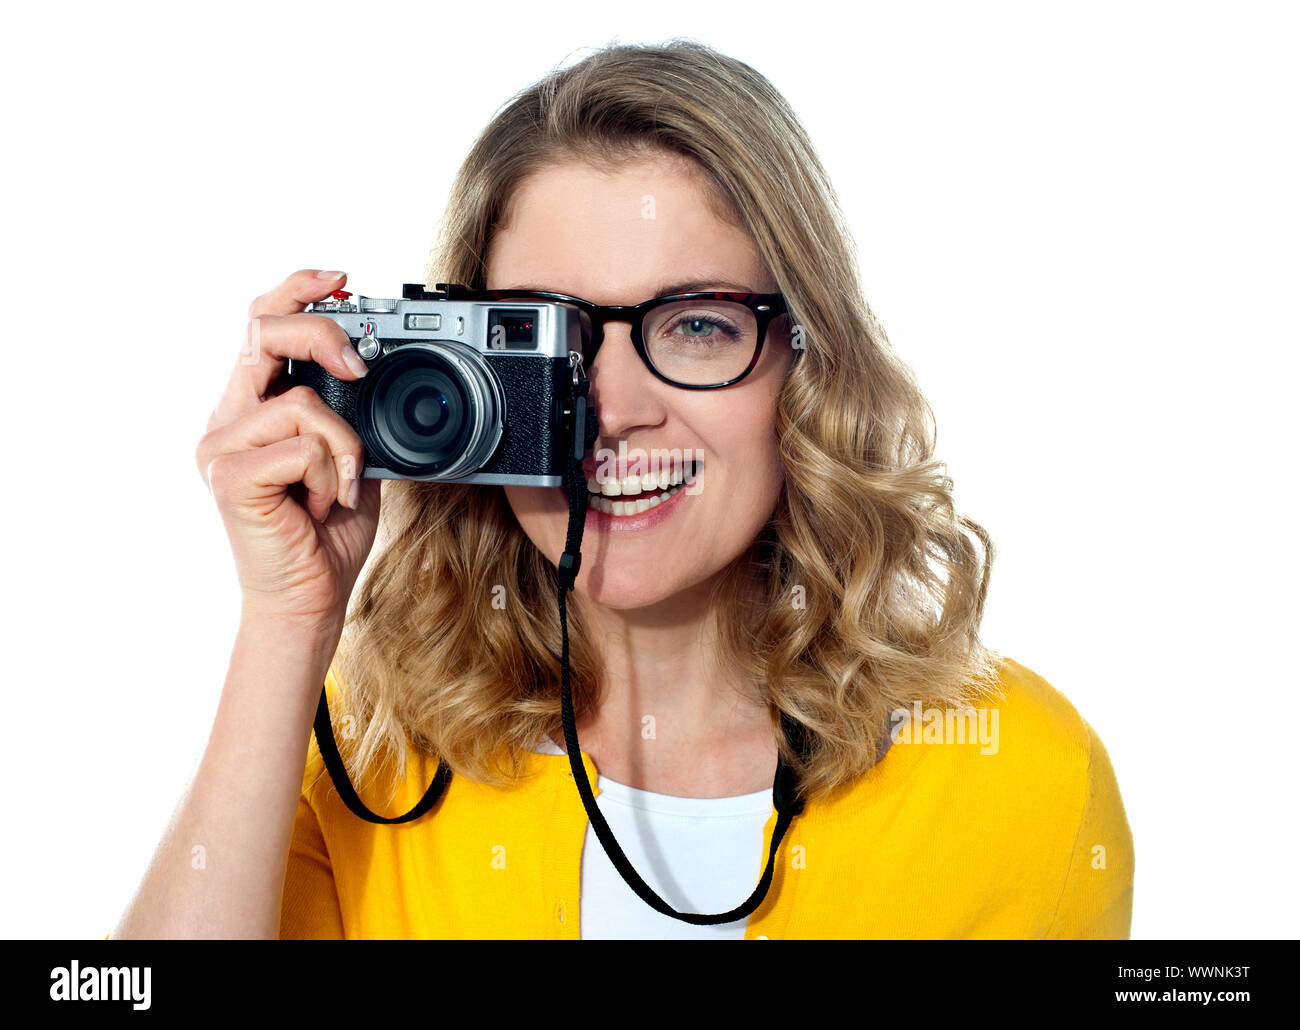 Beautiful young girl with camera, capturing an image Stock Photo